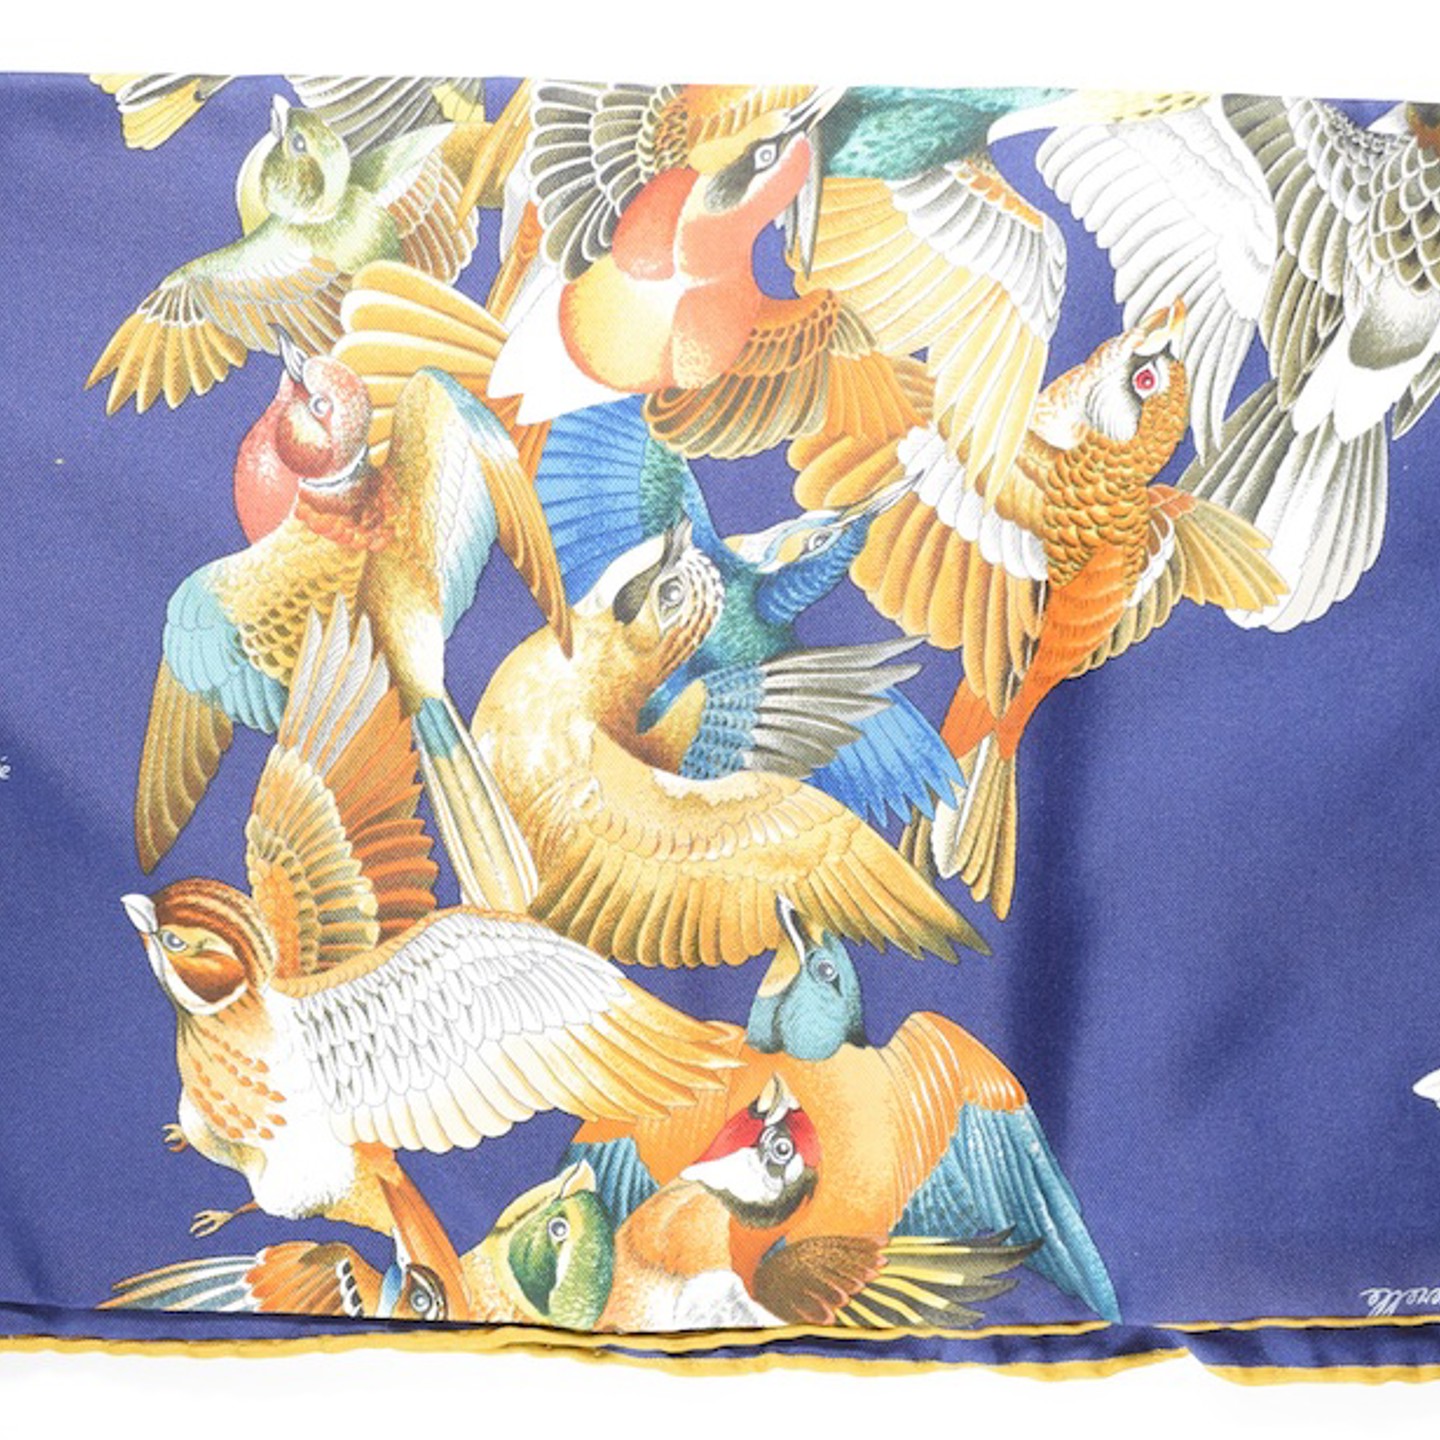 Hermšs Ladies Silk Scarf In Navy Blue With Pattern Of Garden And Wild Birds, 90 X 90Cm, In Original Box With Branded Ribbon, Sold For Œ110